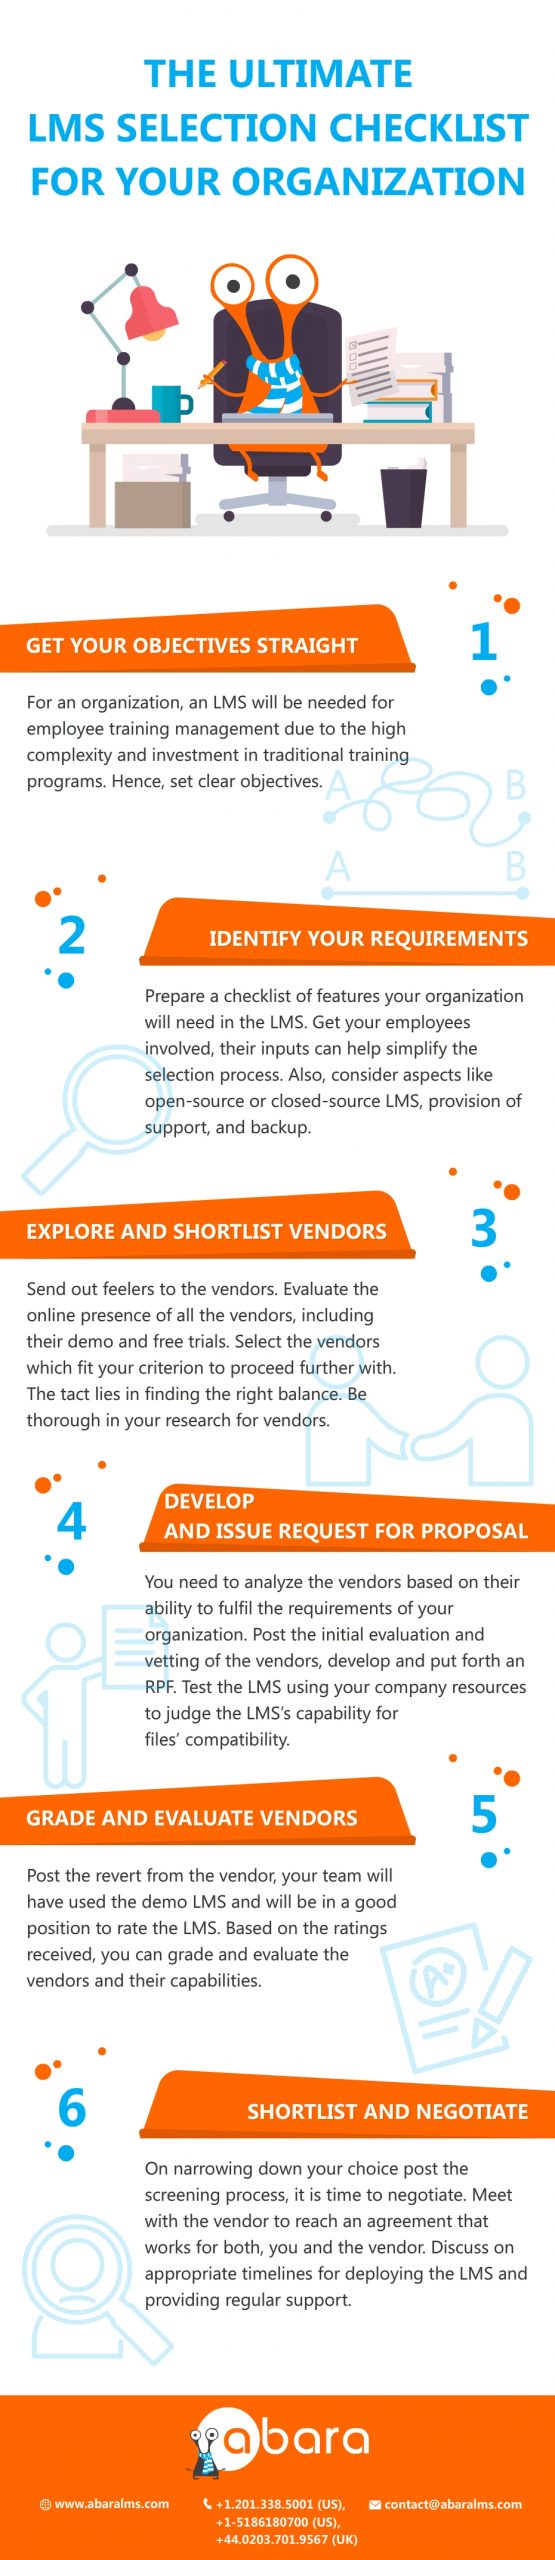 The_ultimate_lms_selection_checklist_for_your_organization